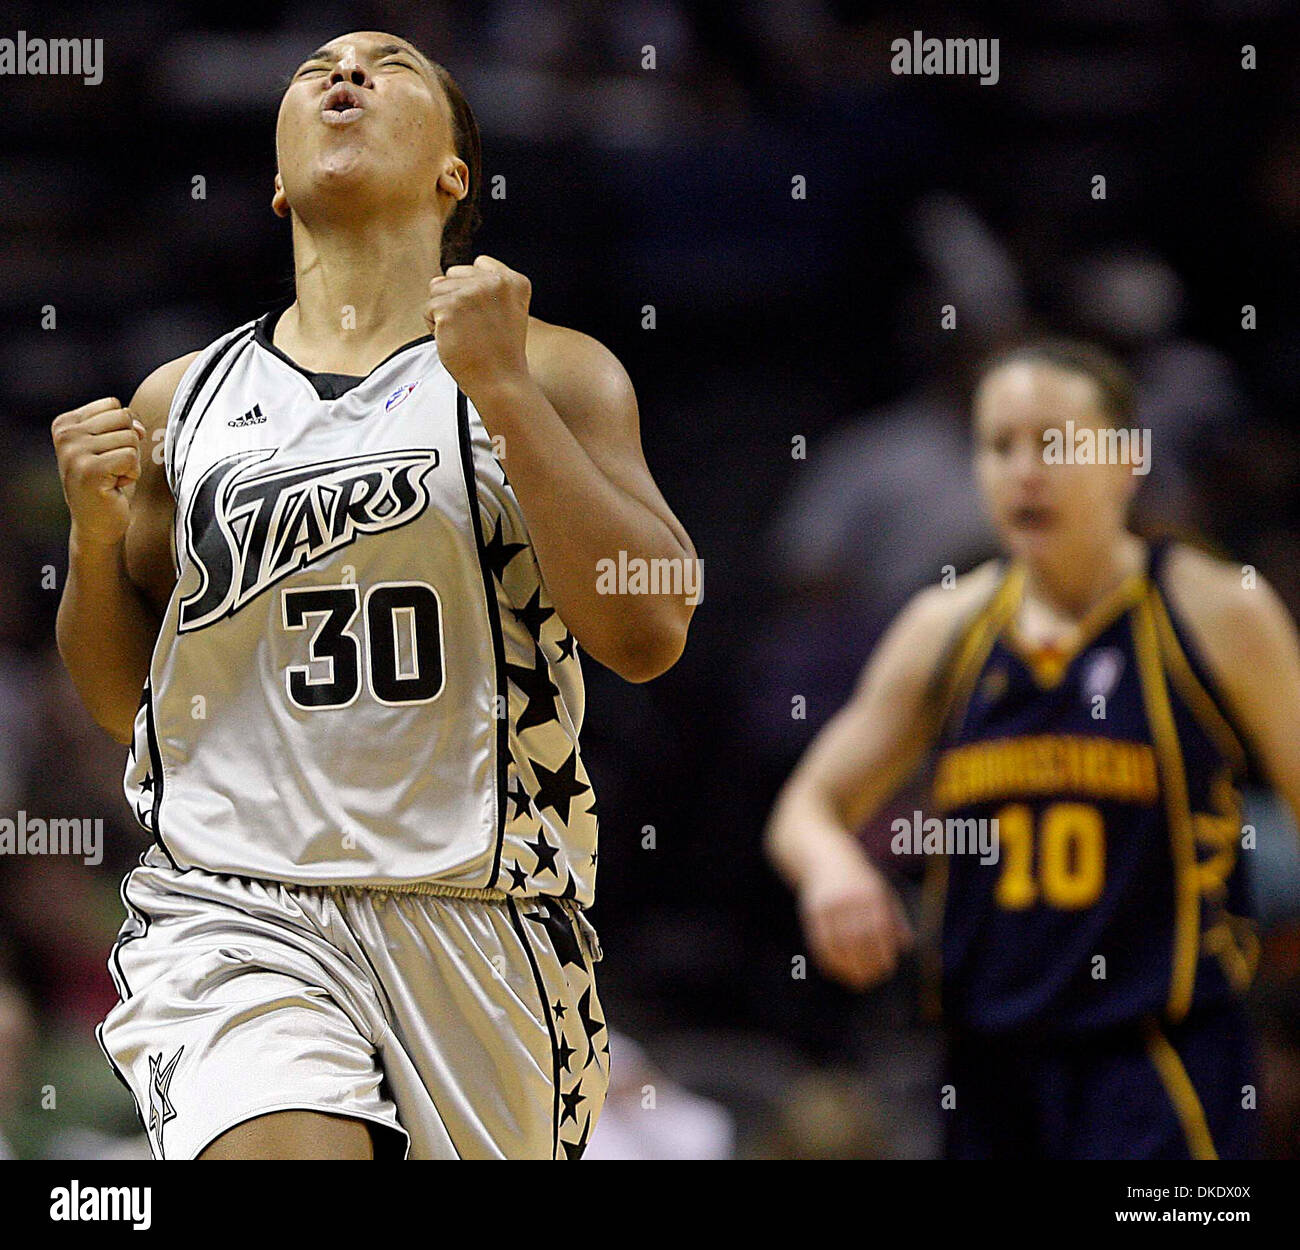 May 23, 2007 - San Antonio, TX, USA - San Antonio Silver Stars HELEN DARLING reacts to a foul on an attempted steal against the Connecticut Sun player JAIME CAREY in the 2nd quarter at the at&t center Wednesday May 23, 2007. (Credit Image: © Delcia Lopez/San Antonio Express-News/ZUMA Press) RESTRICTIONS: US Tabloid Sales OUT! SAN ANTONIO and SEATTLE NEWS PAPERS OUT! Stock Photo